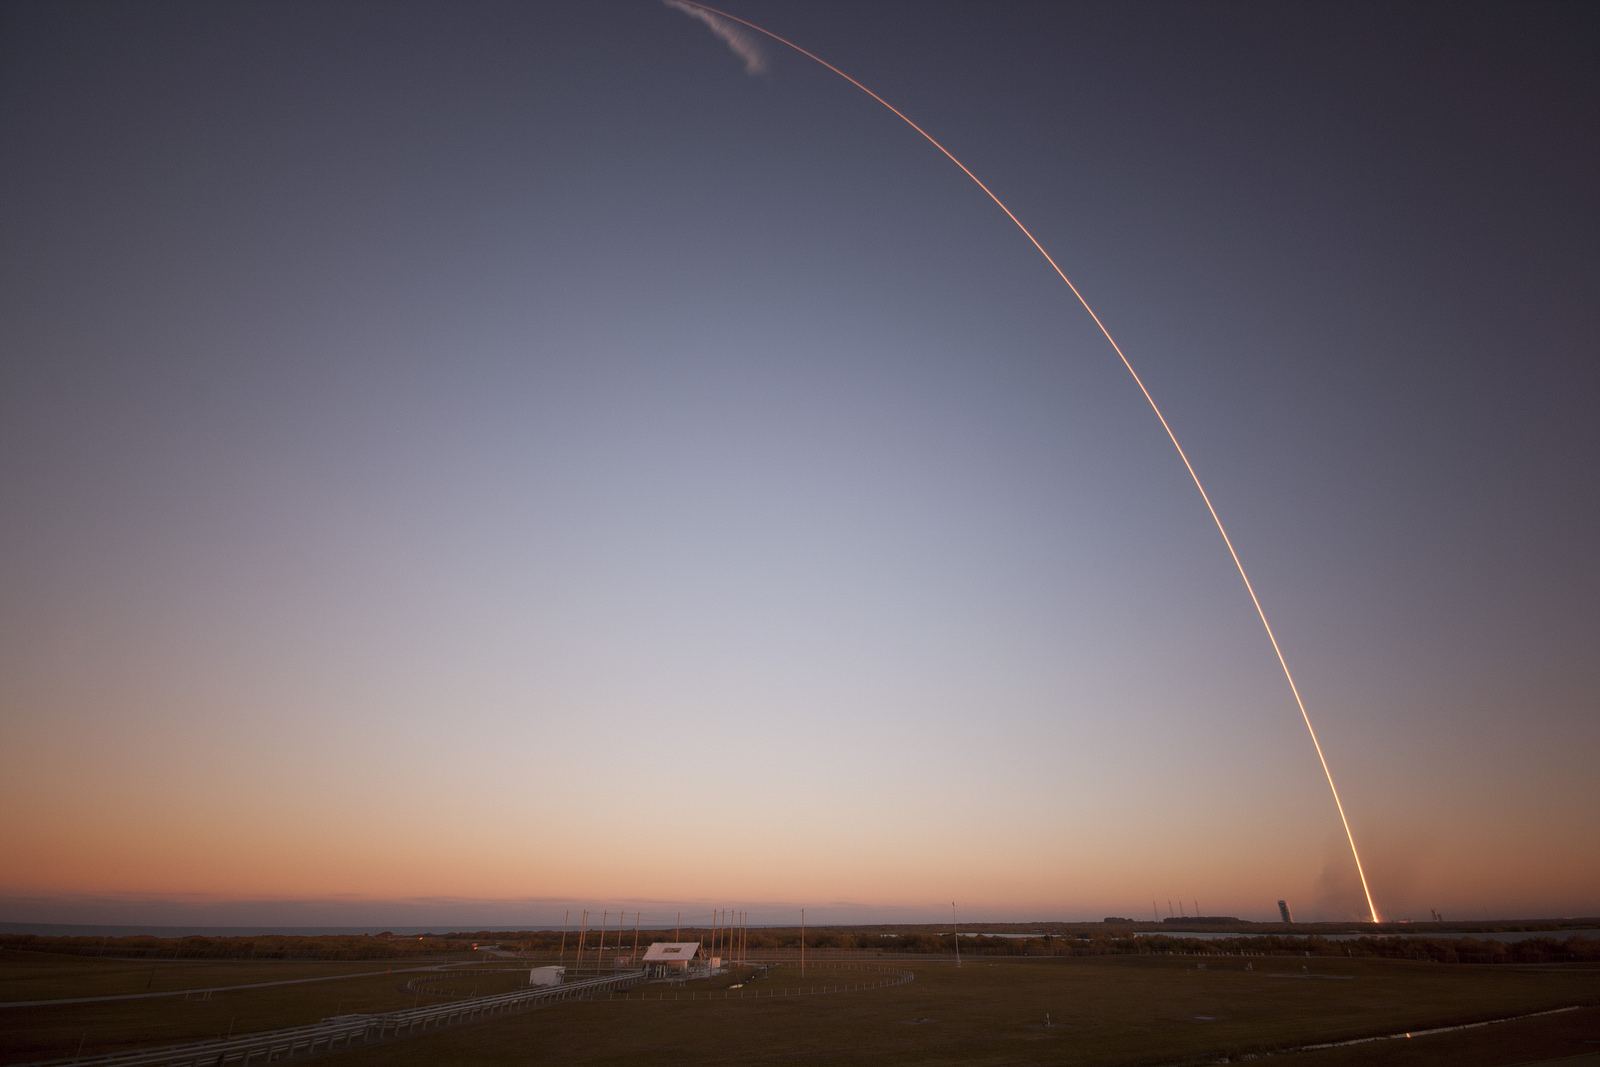 spacex7 Falcon 9 lifted off from SpaceX Launch Complex